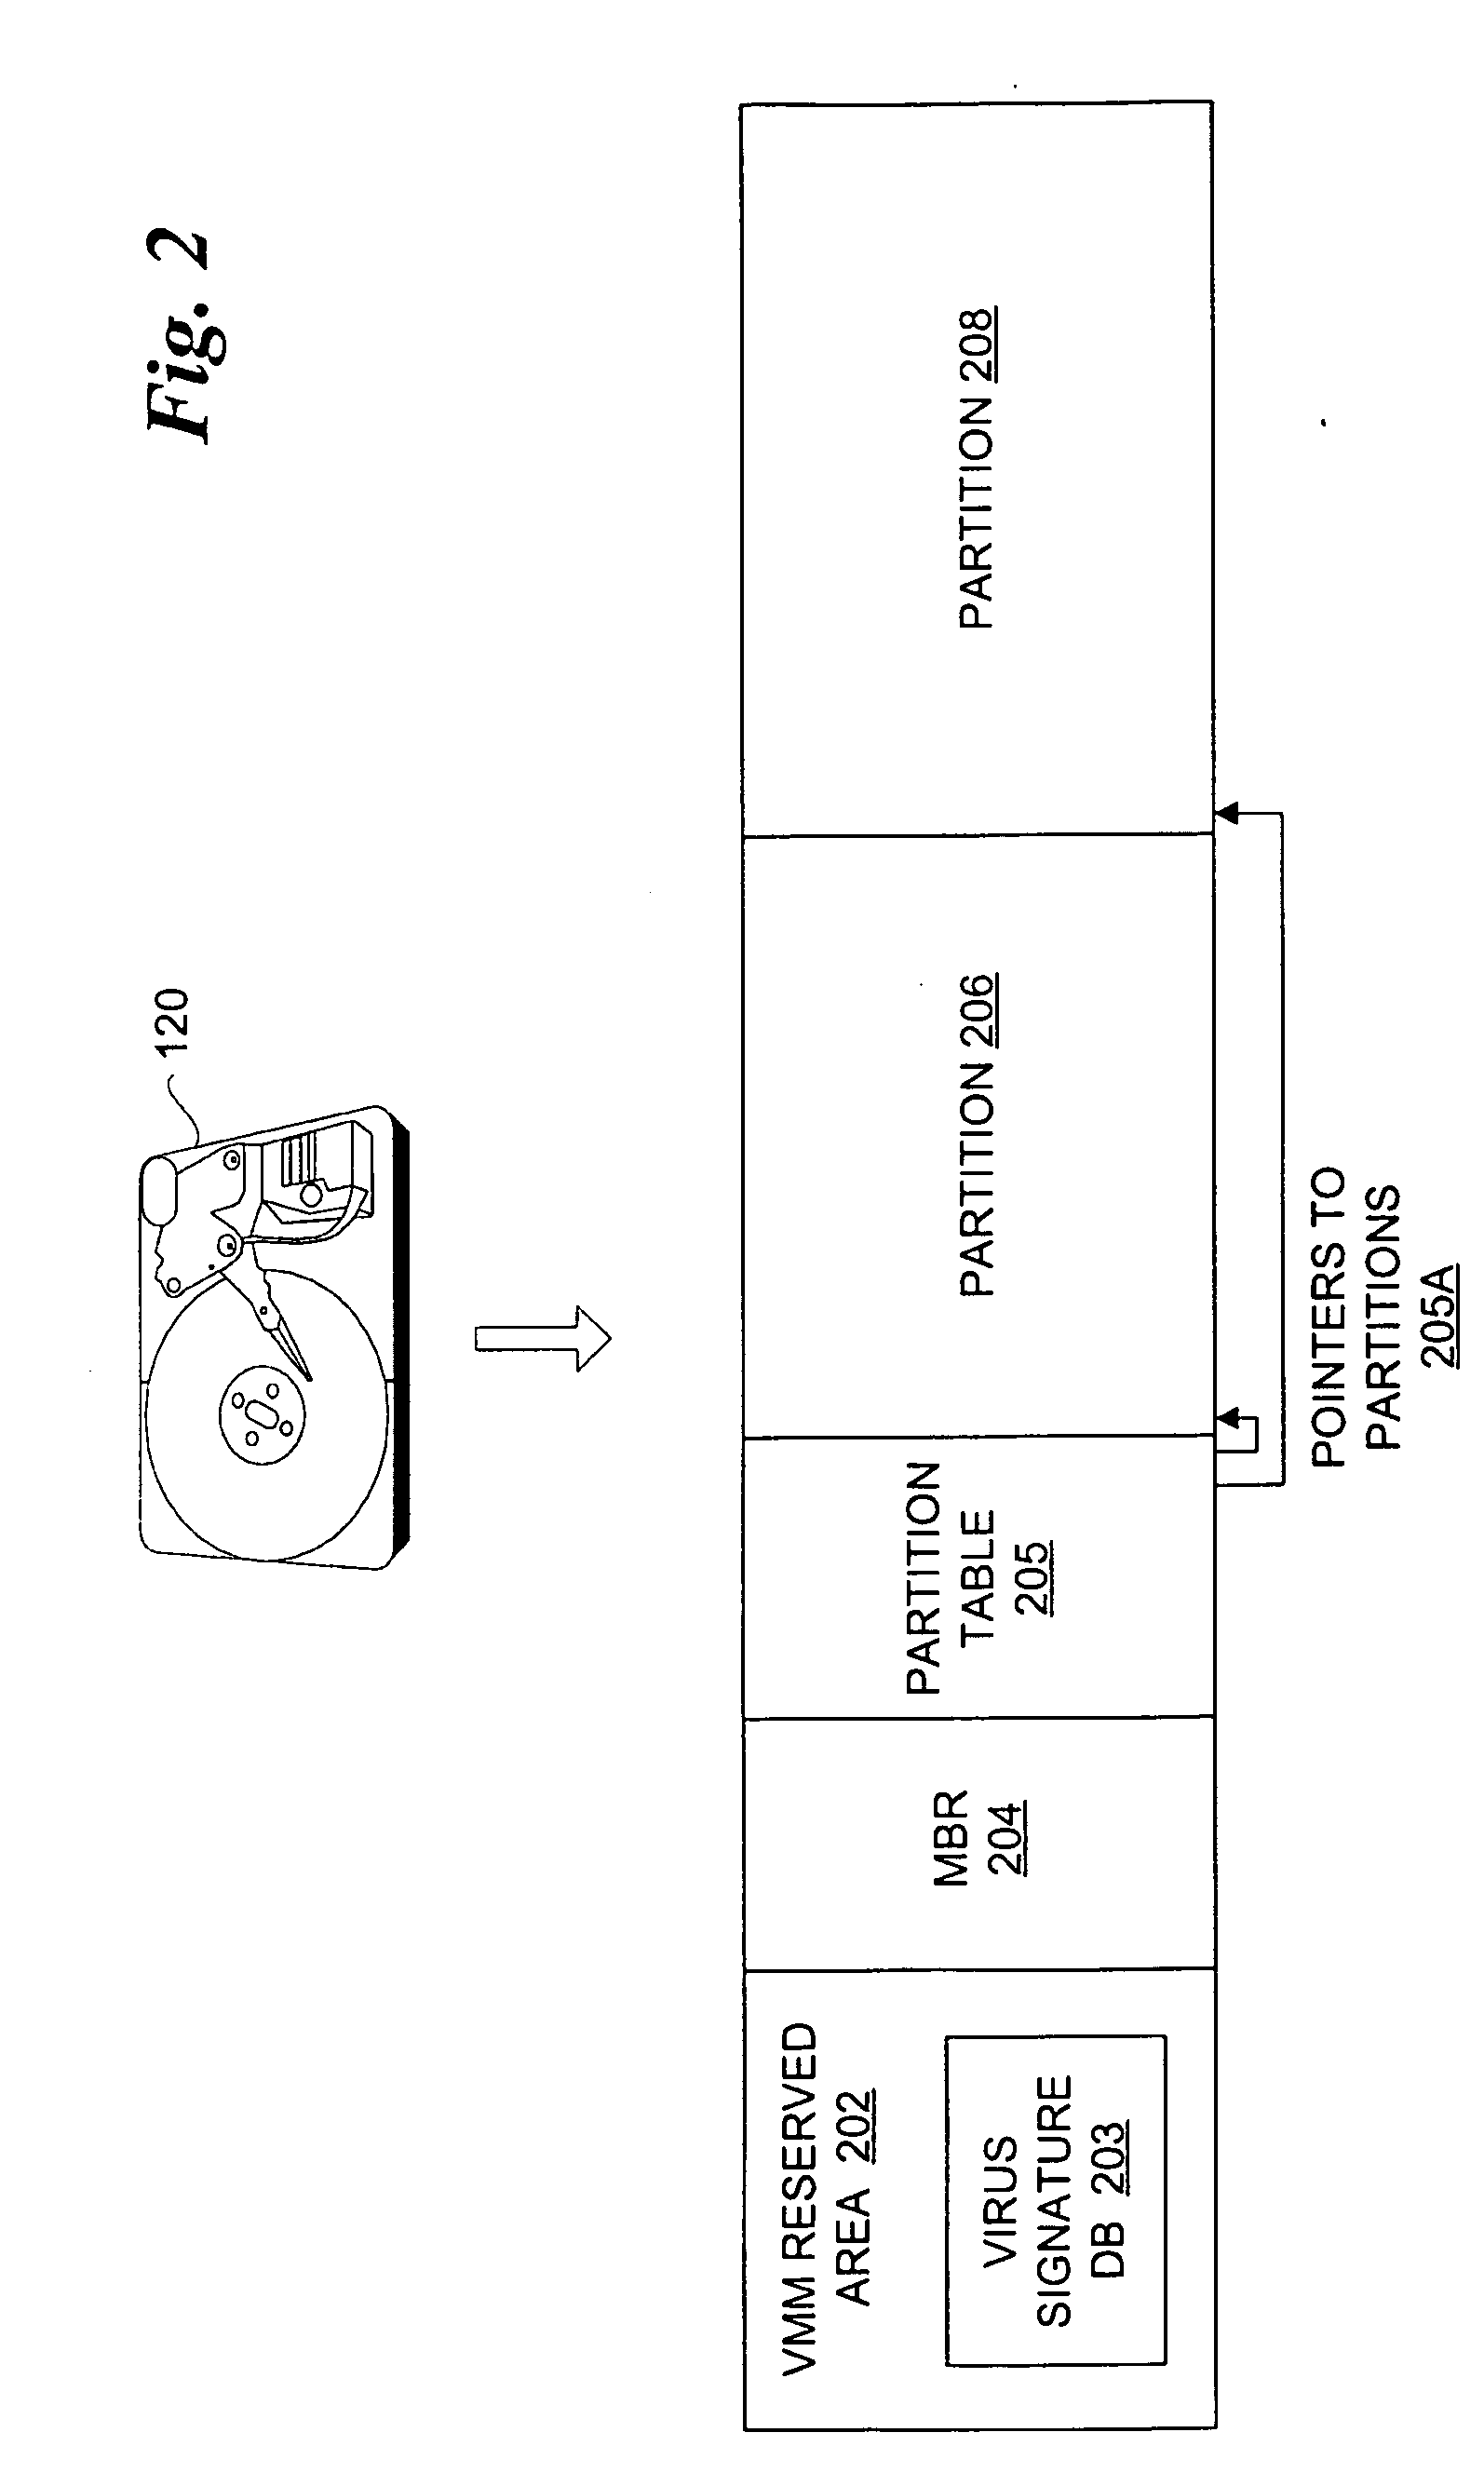 Virus scanning of input/output traffic of a computer system